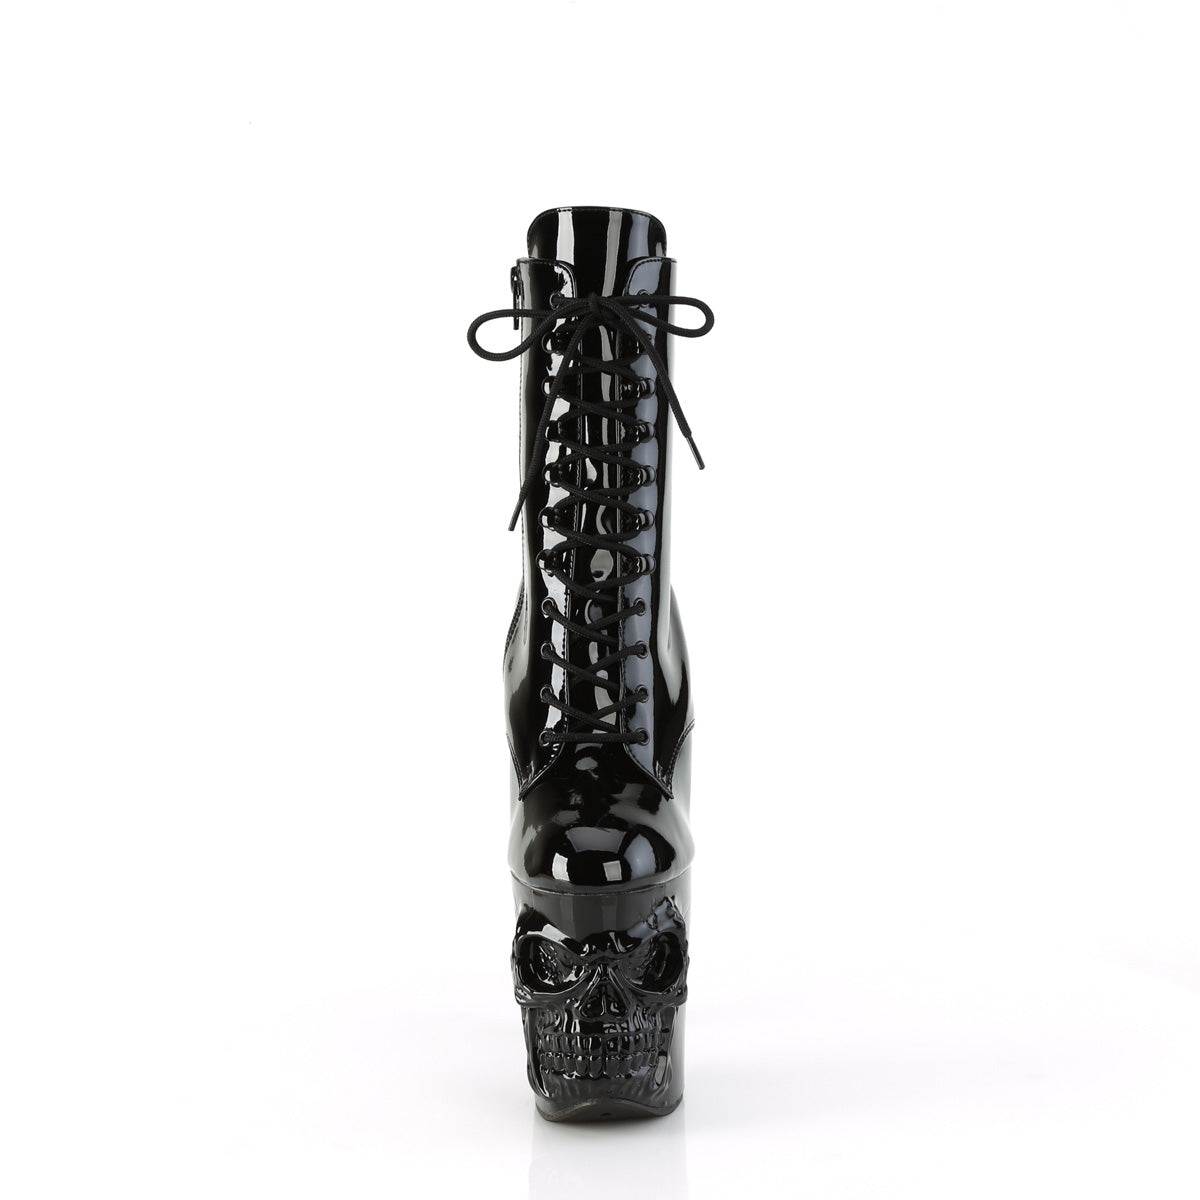 RAPTURE-1020 / B / M 8 "PLEASER FAST DELIVERY 24-48h 